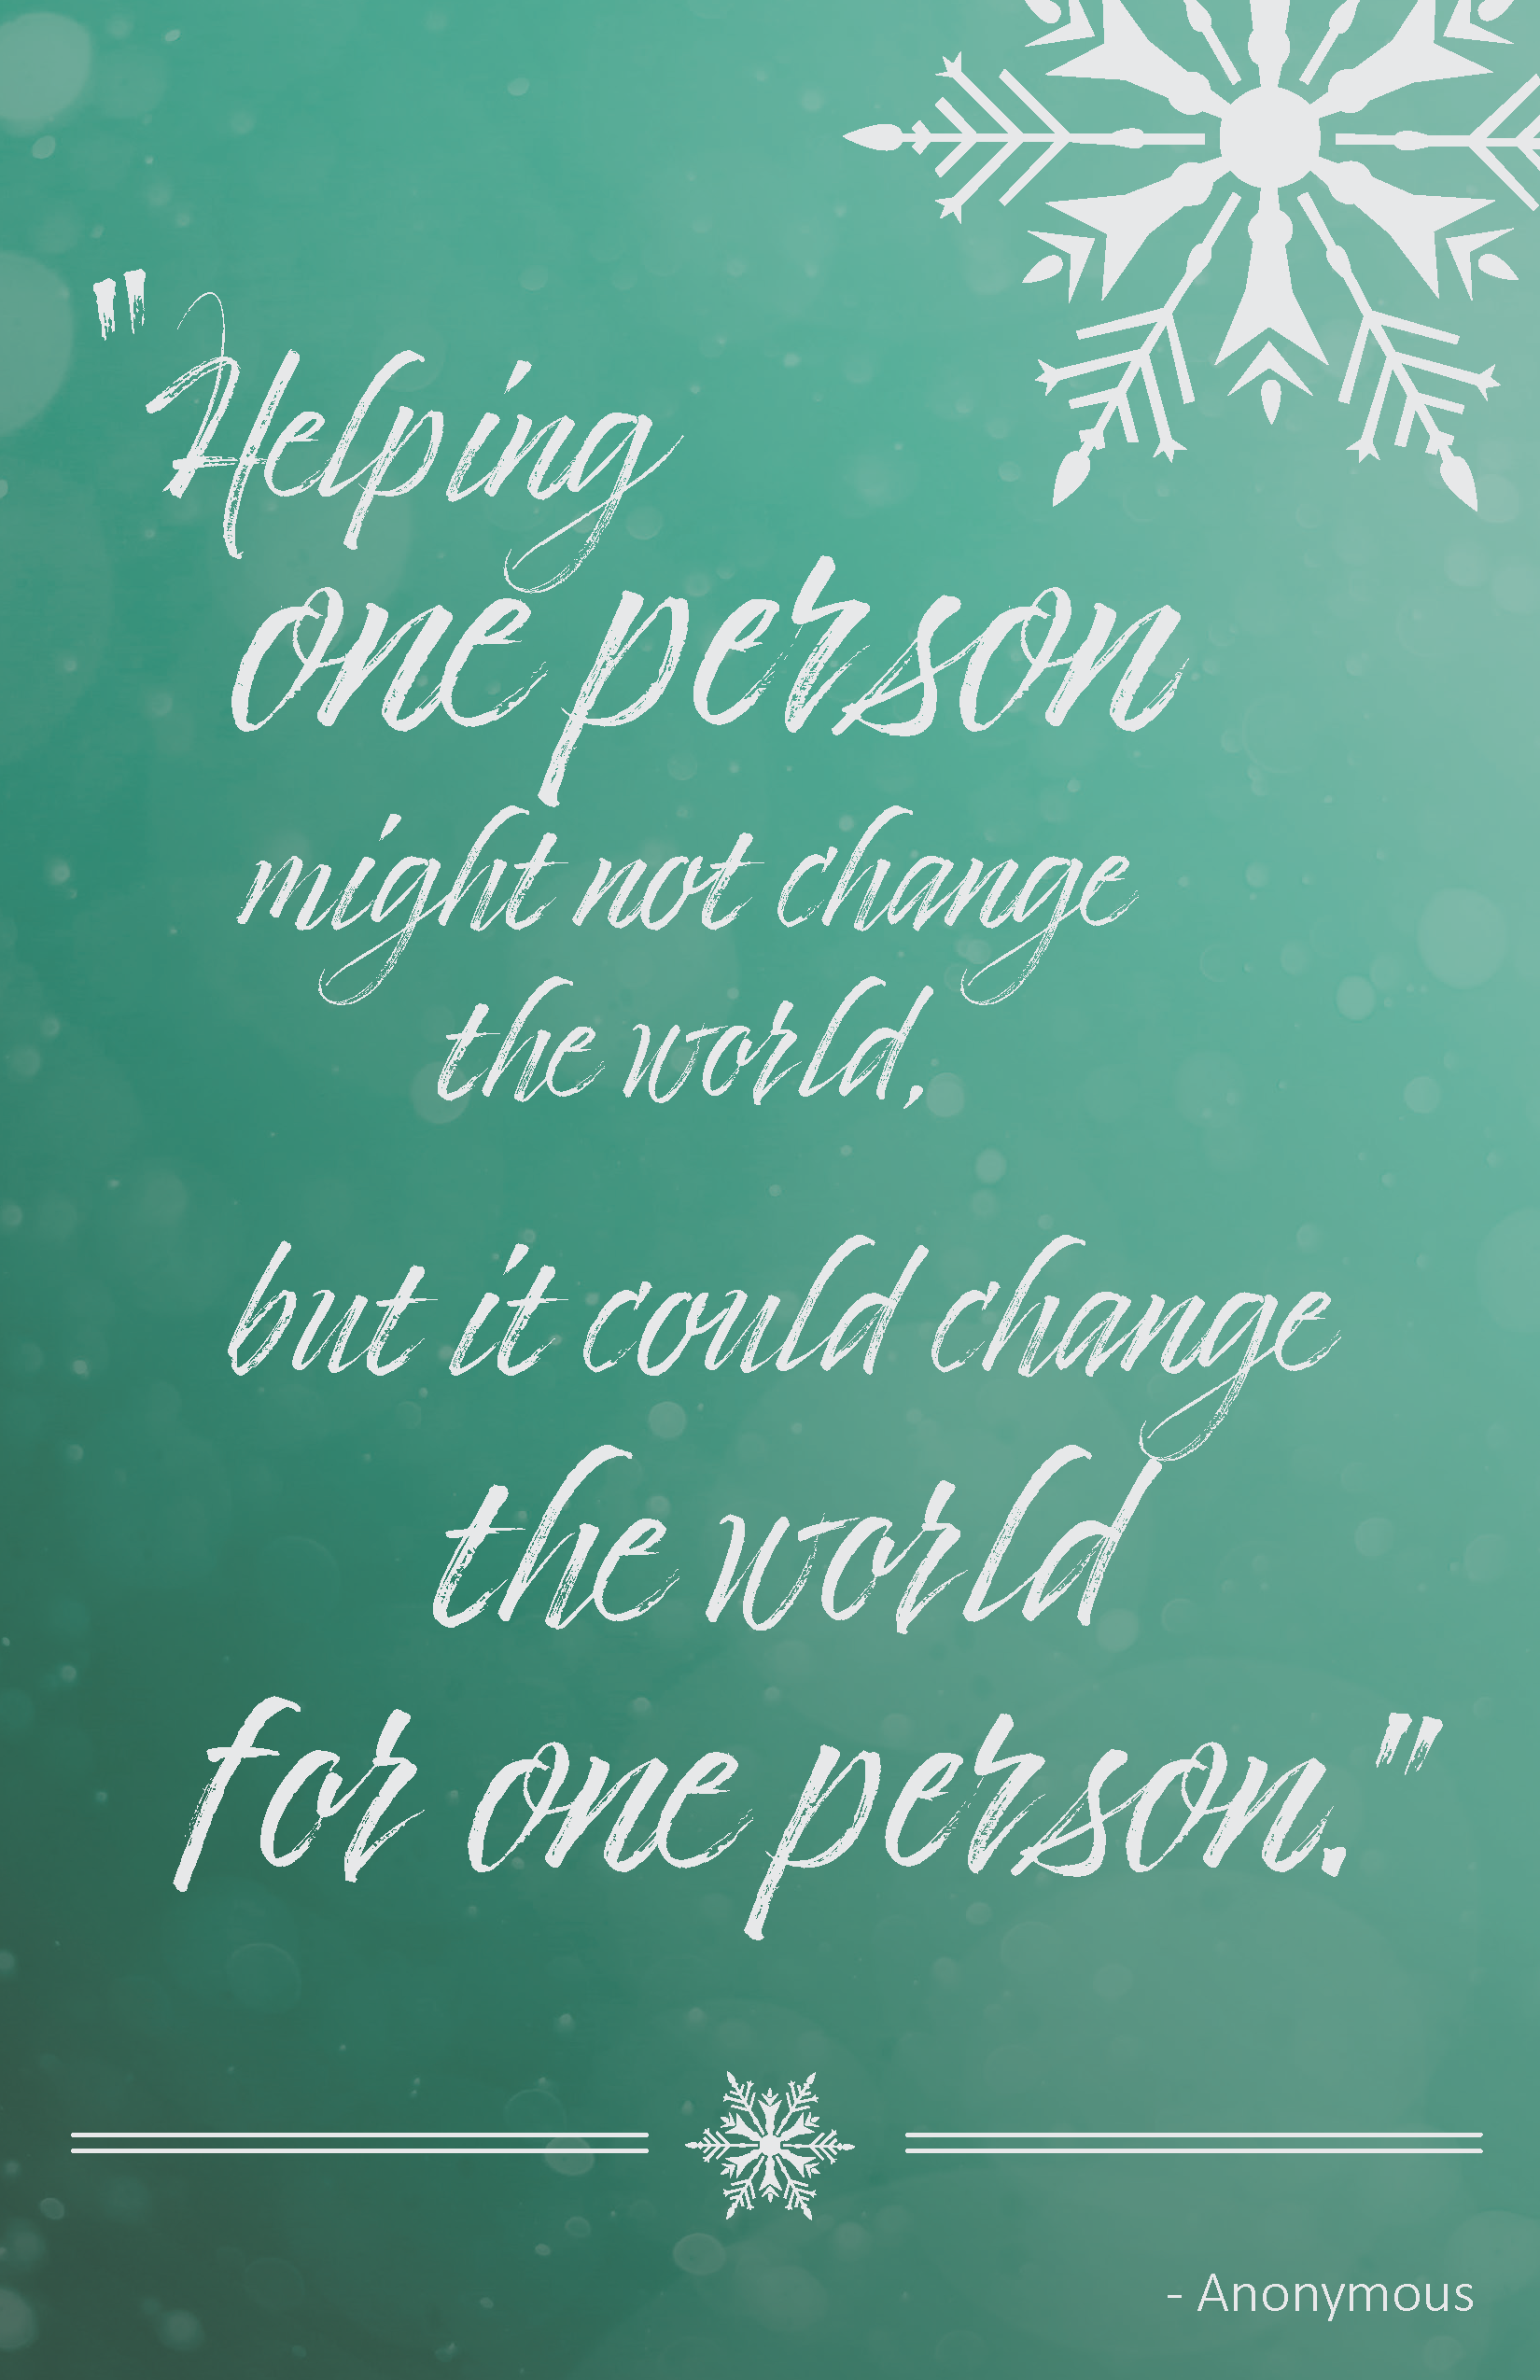 quote - helping one person might not change the world, but it could change the world for one person